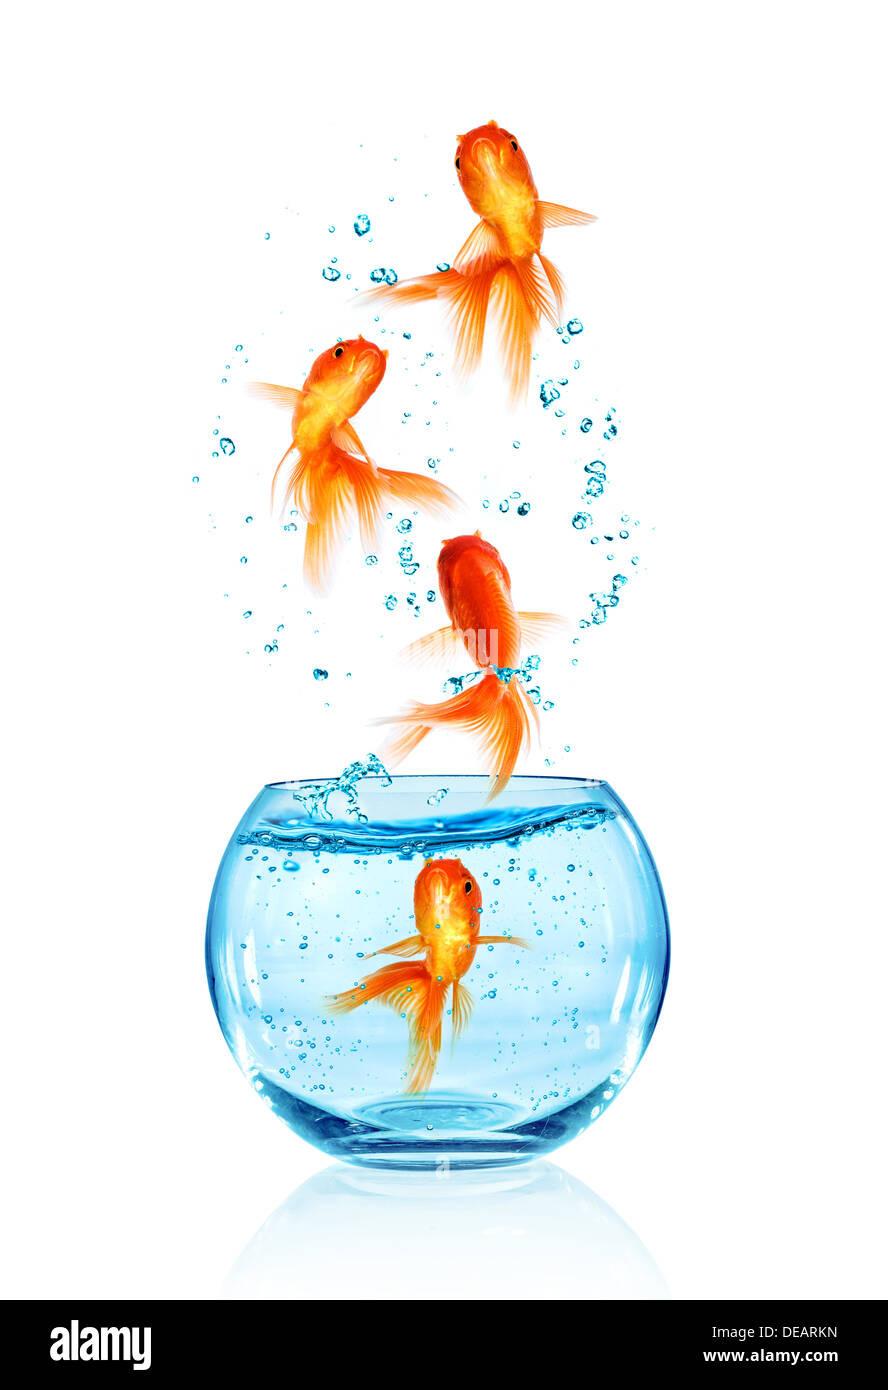 Goldfish jumping out of the aquarium isolated on white background. Search of freedom. Stock Photo